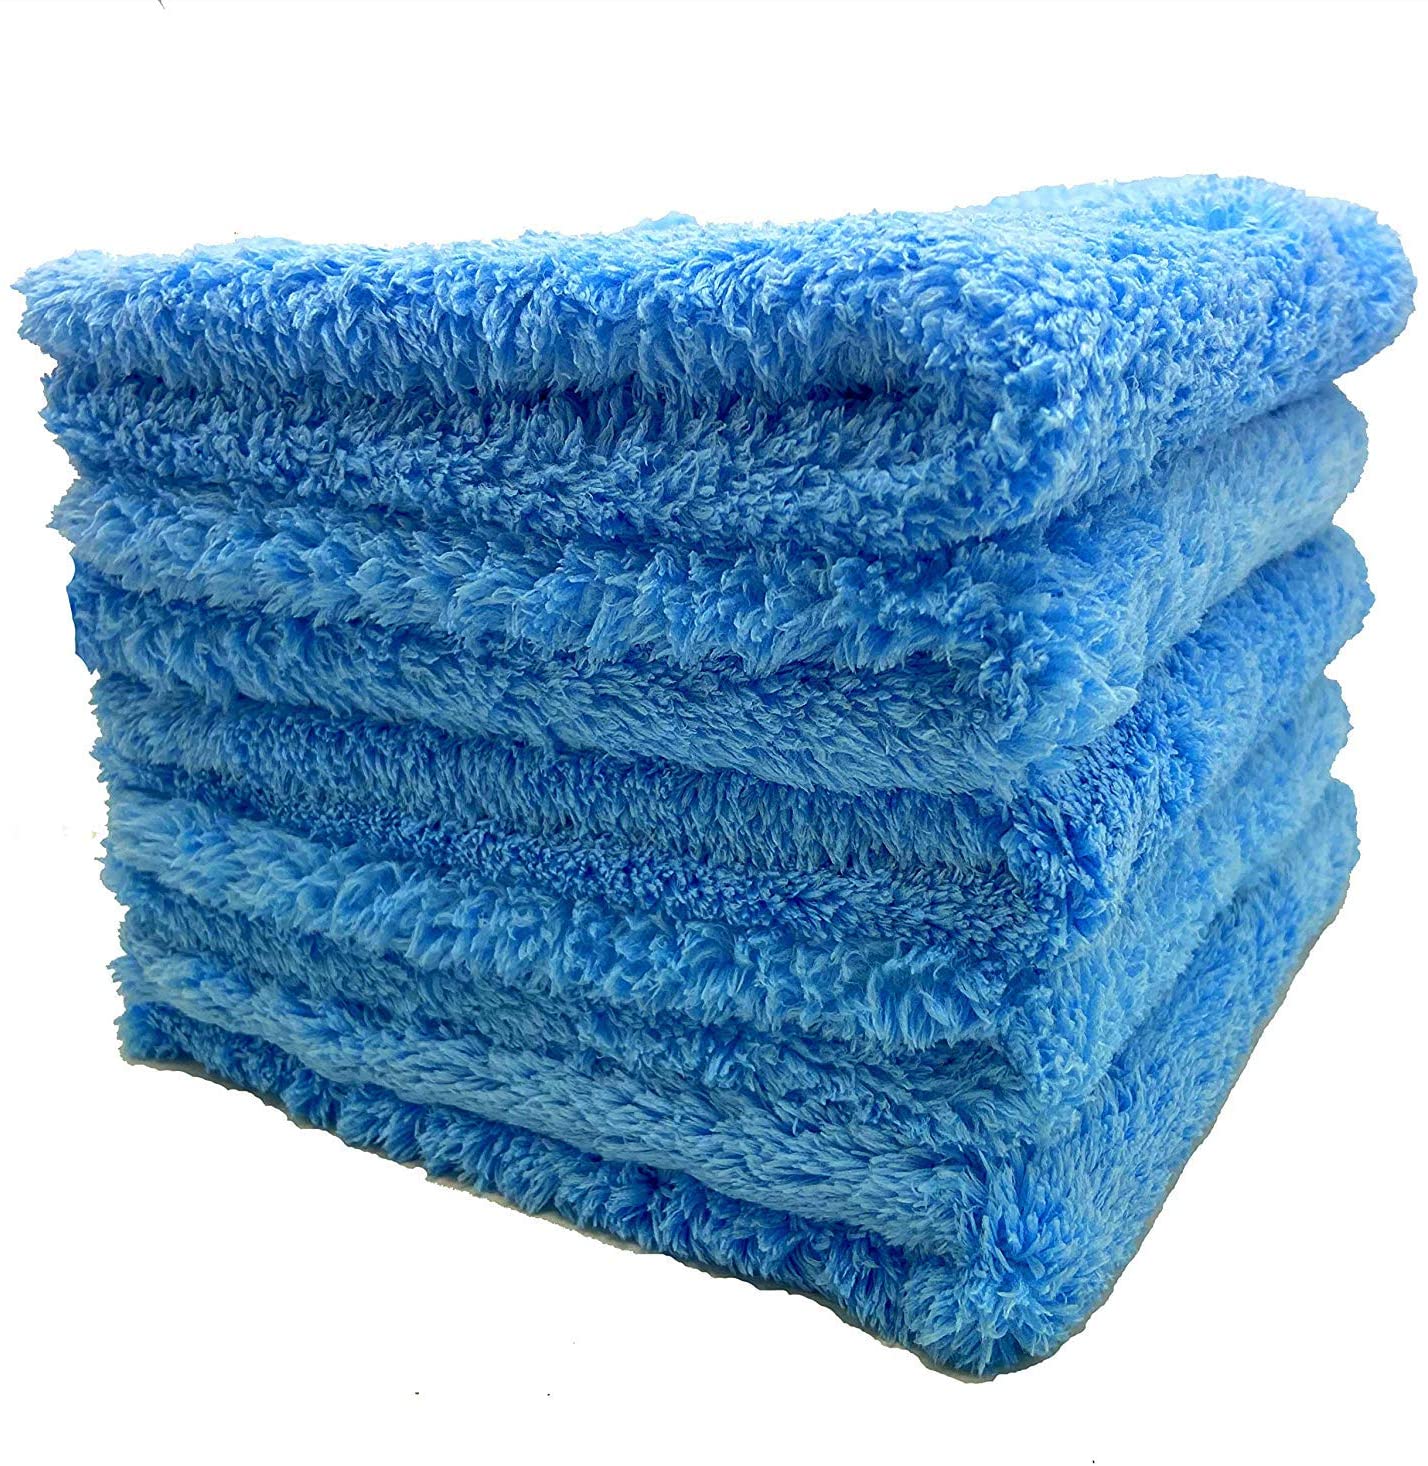  Kingsheep 6Pack Car Microfiber Towel for Auto Thick Buffing  Microfiber Cleaning Cloth 16x16 Plush Polishing Drying Towels 450gsm  Detailing Cloths : Automotive